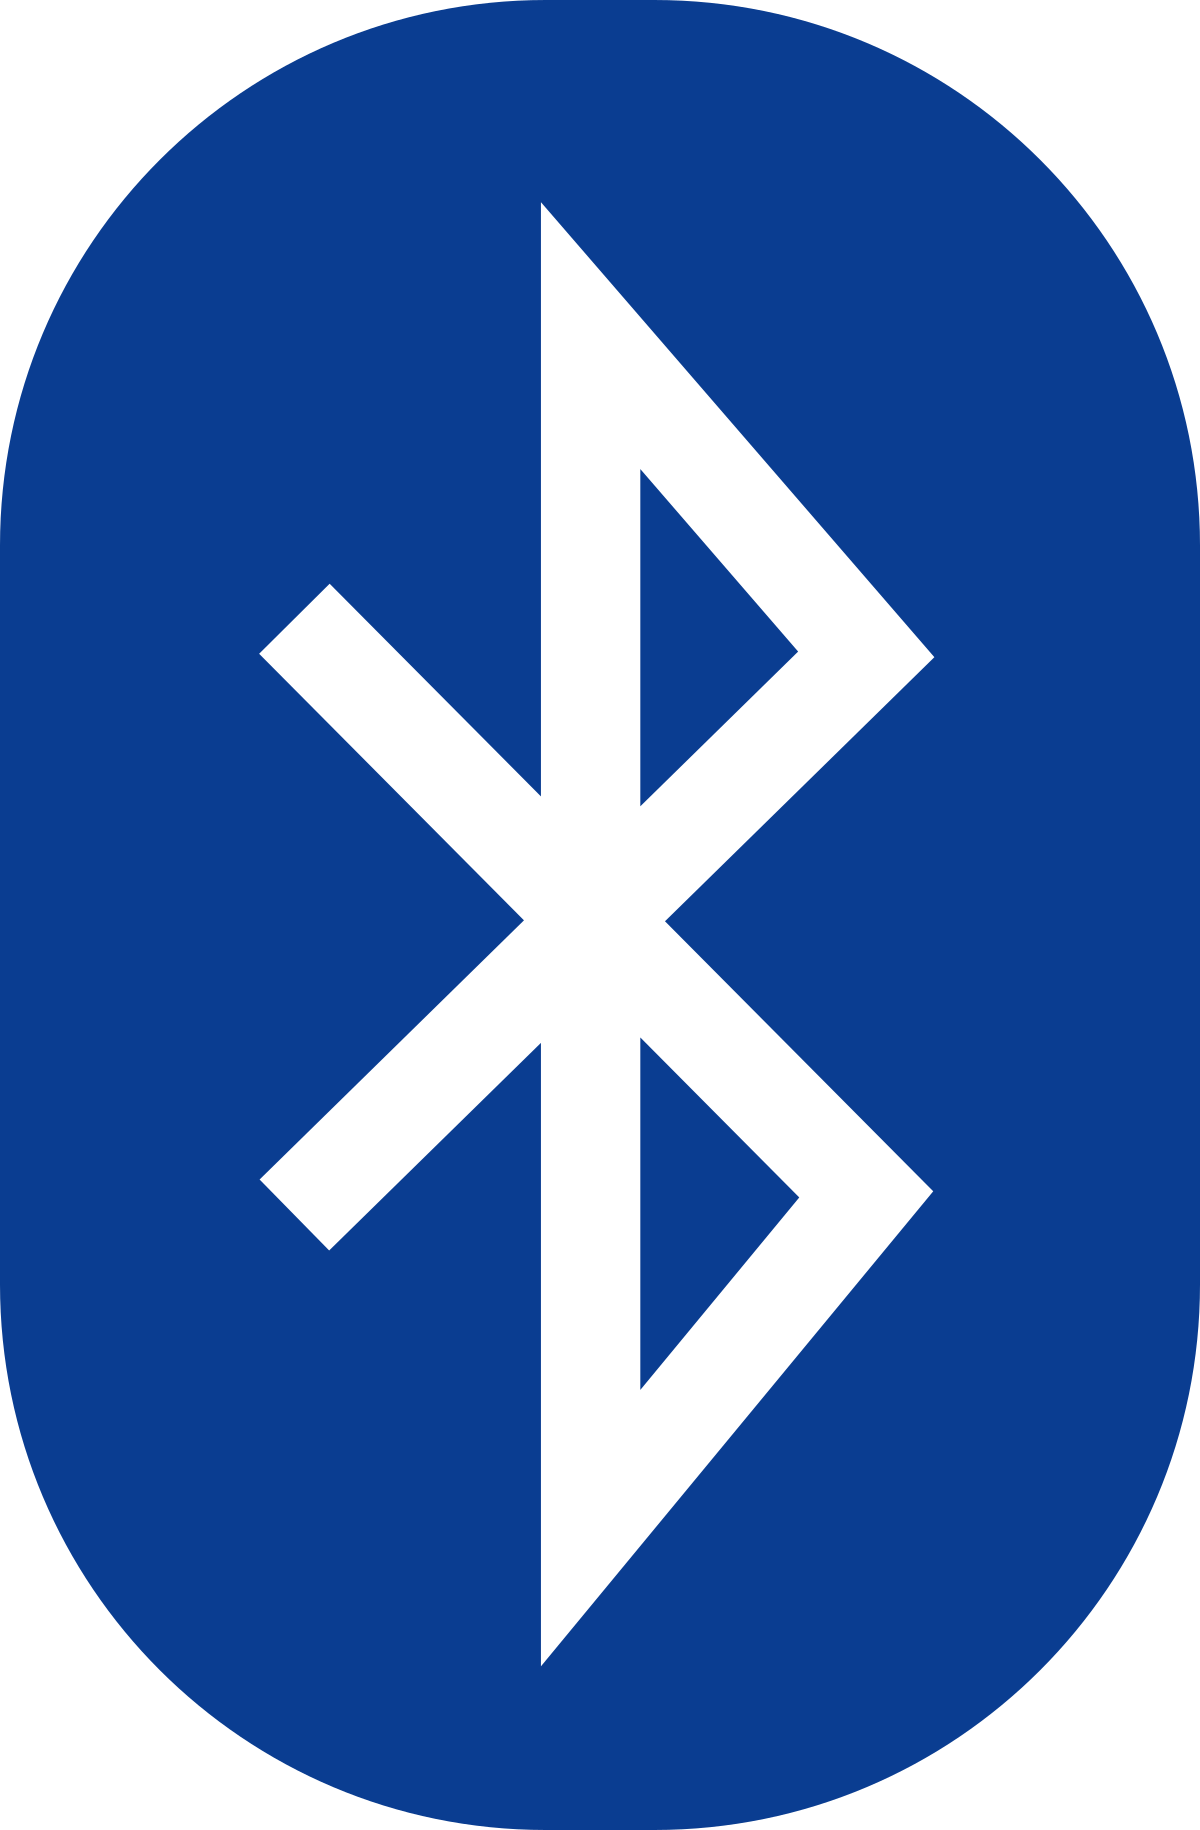 Image of a Windows 11 interface with a Bluetooth symbol.